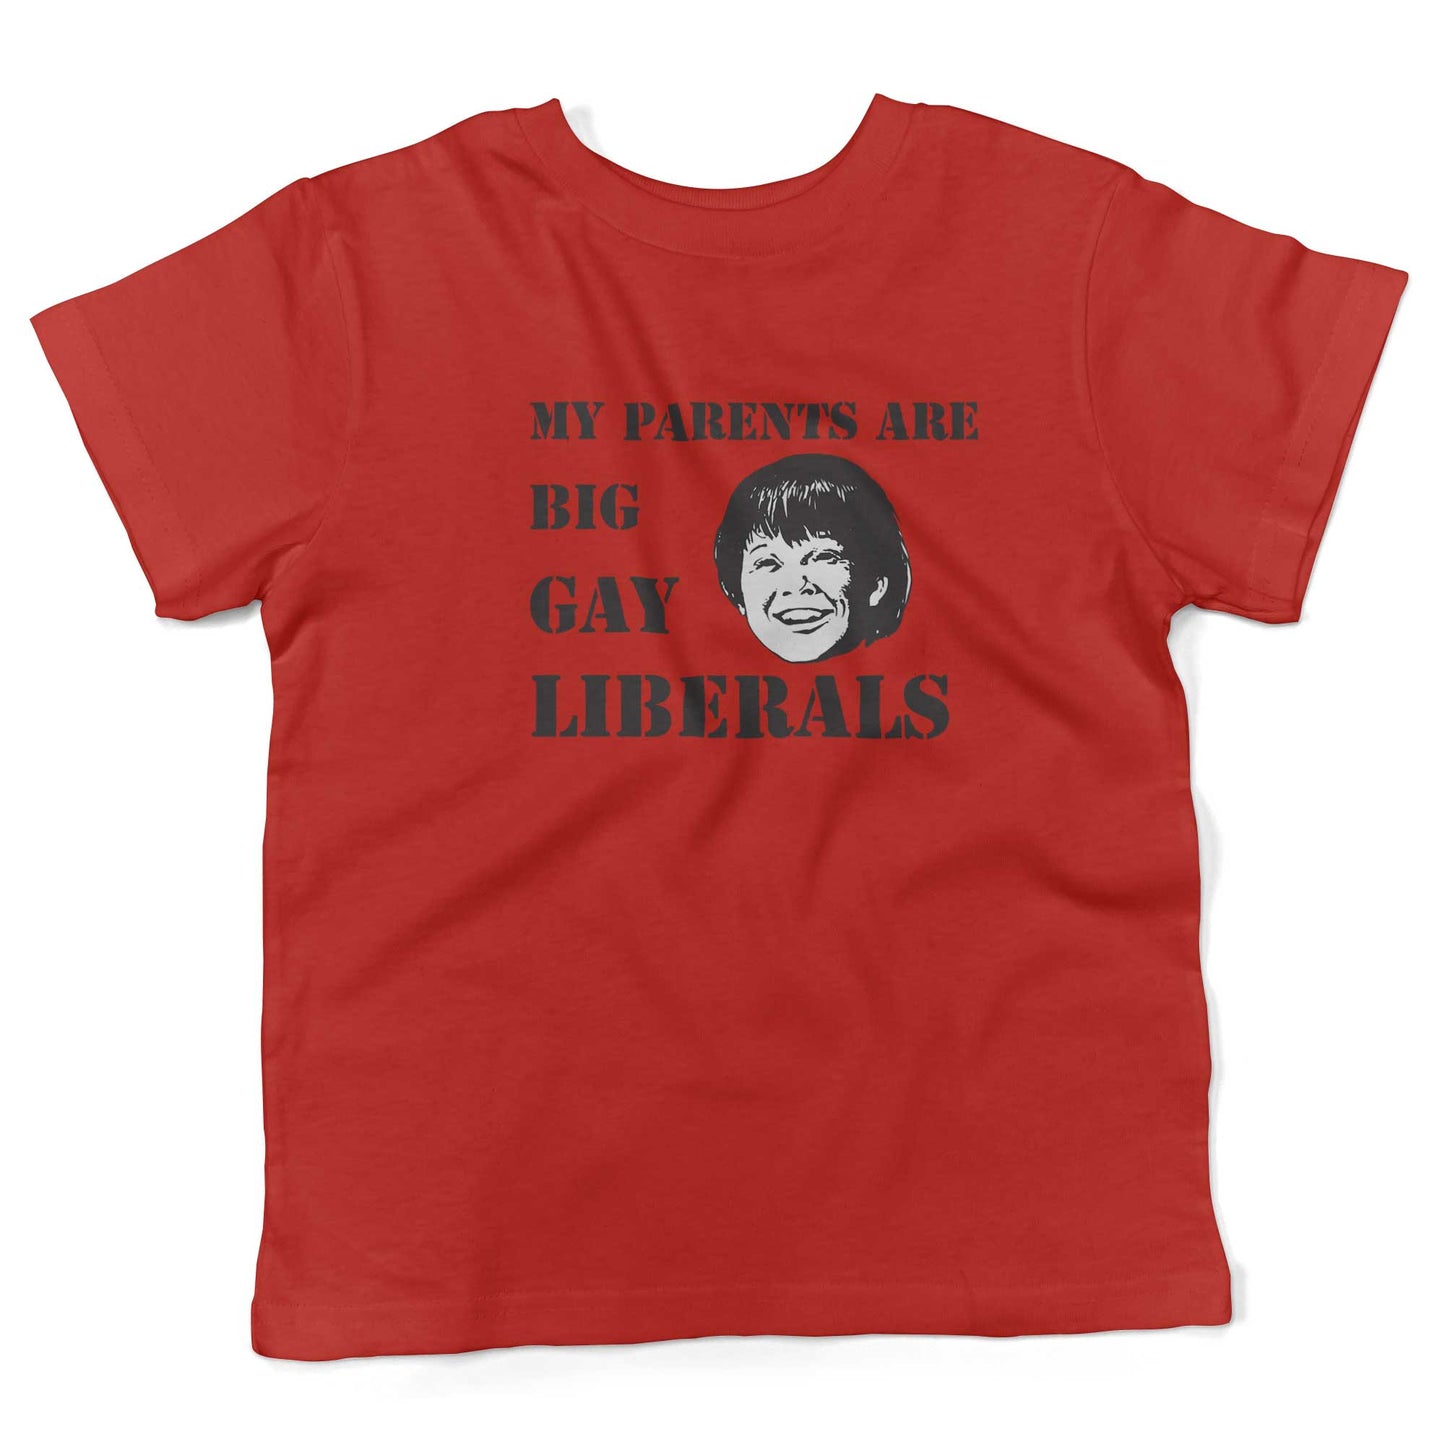 My Parents Are Big, Gay Liberals Toddler Shirt-Red-2T